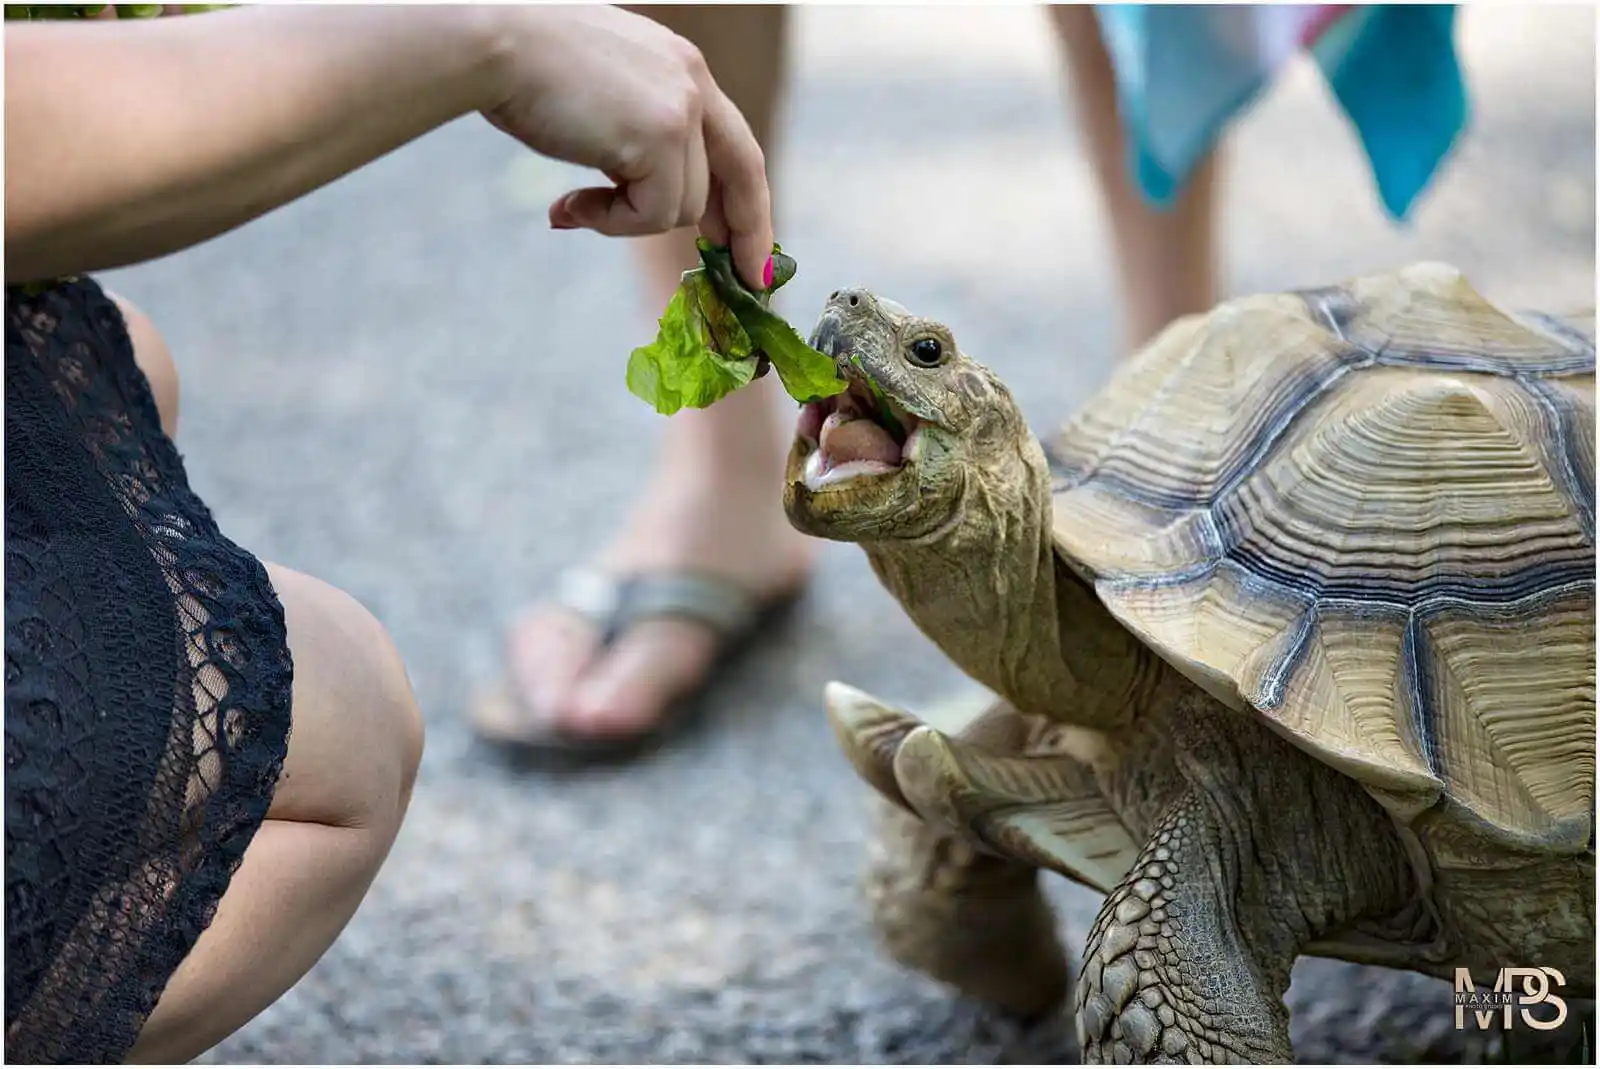 Person feeding fresh lettuce to a hungry tortoise.